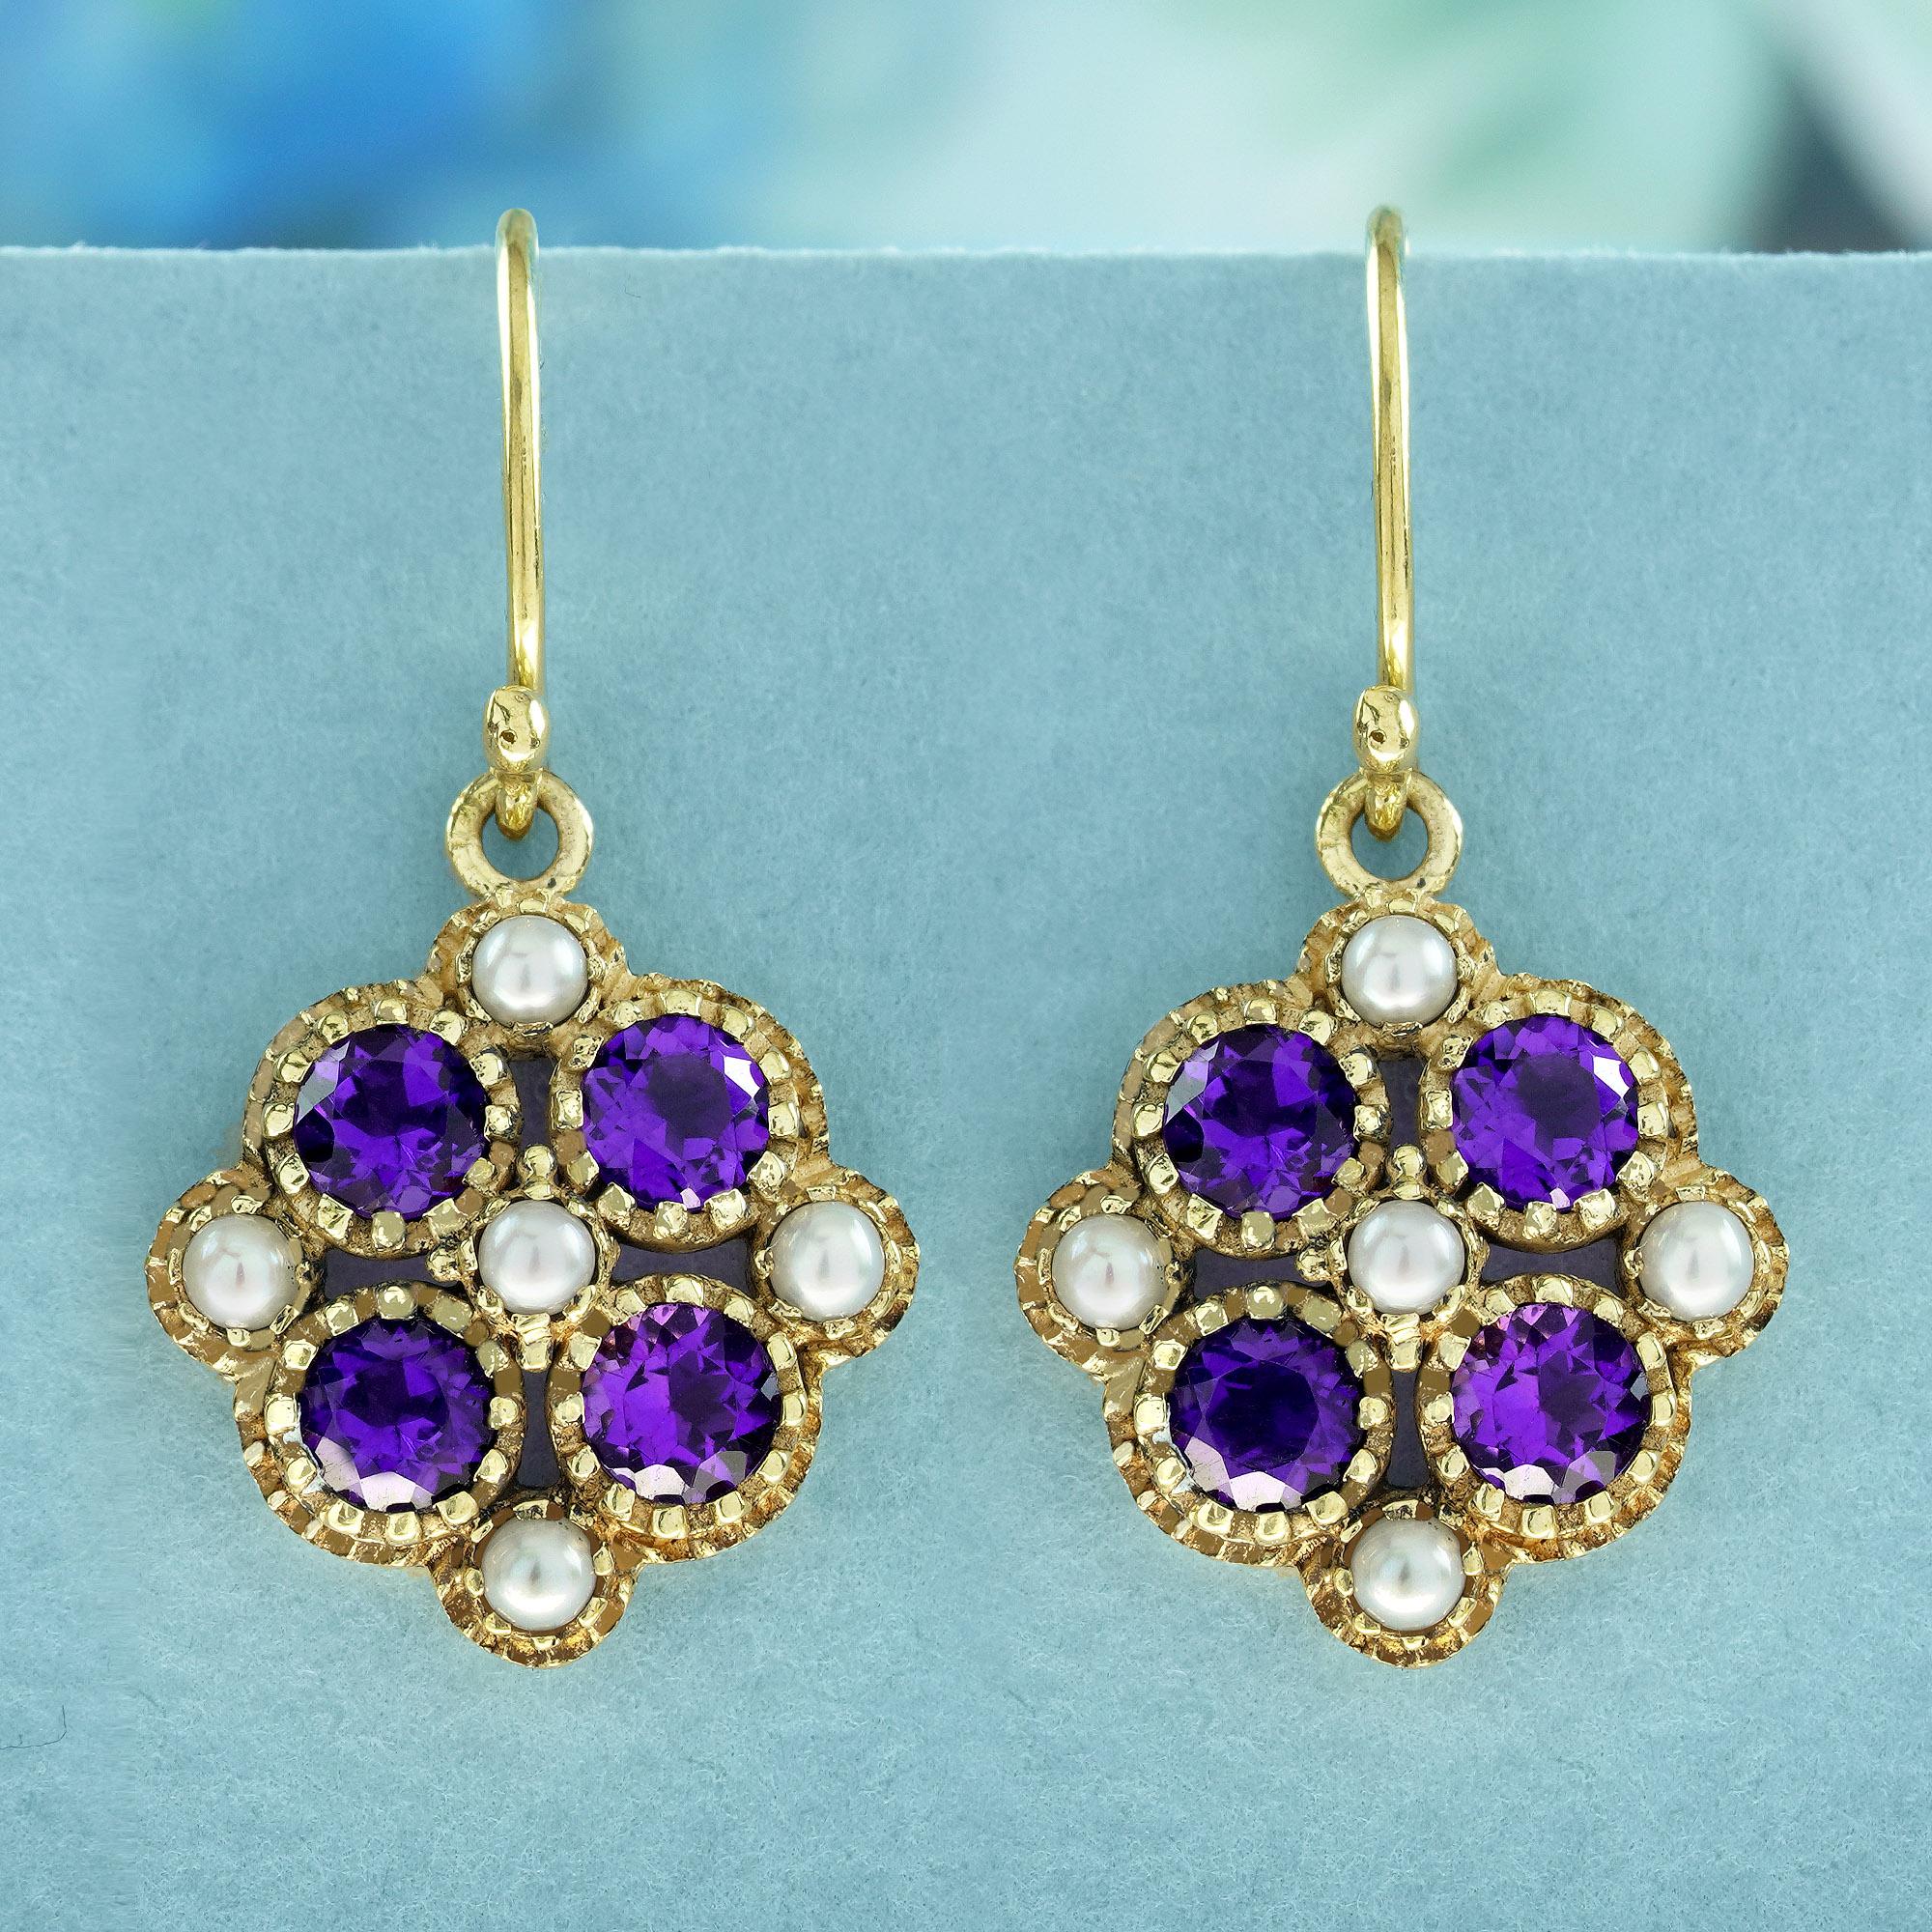  Crafted from yellow gold in a migraine work, this elegant vintage-style floral earrings are embellished with four exquisite round purple amethysts, each resembling delicate petals. Nestled between each amethyst are smaller white pearls, adding a